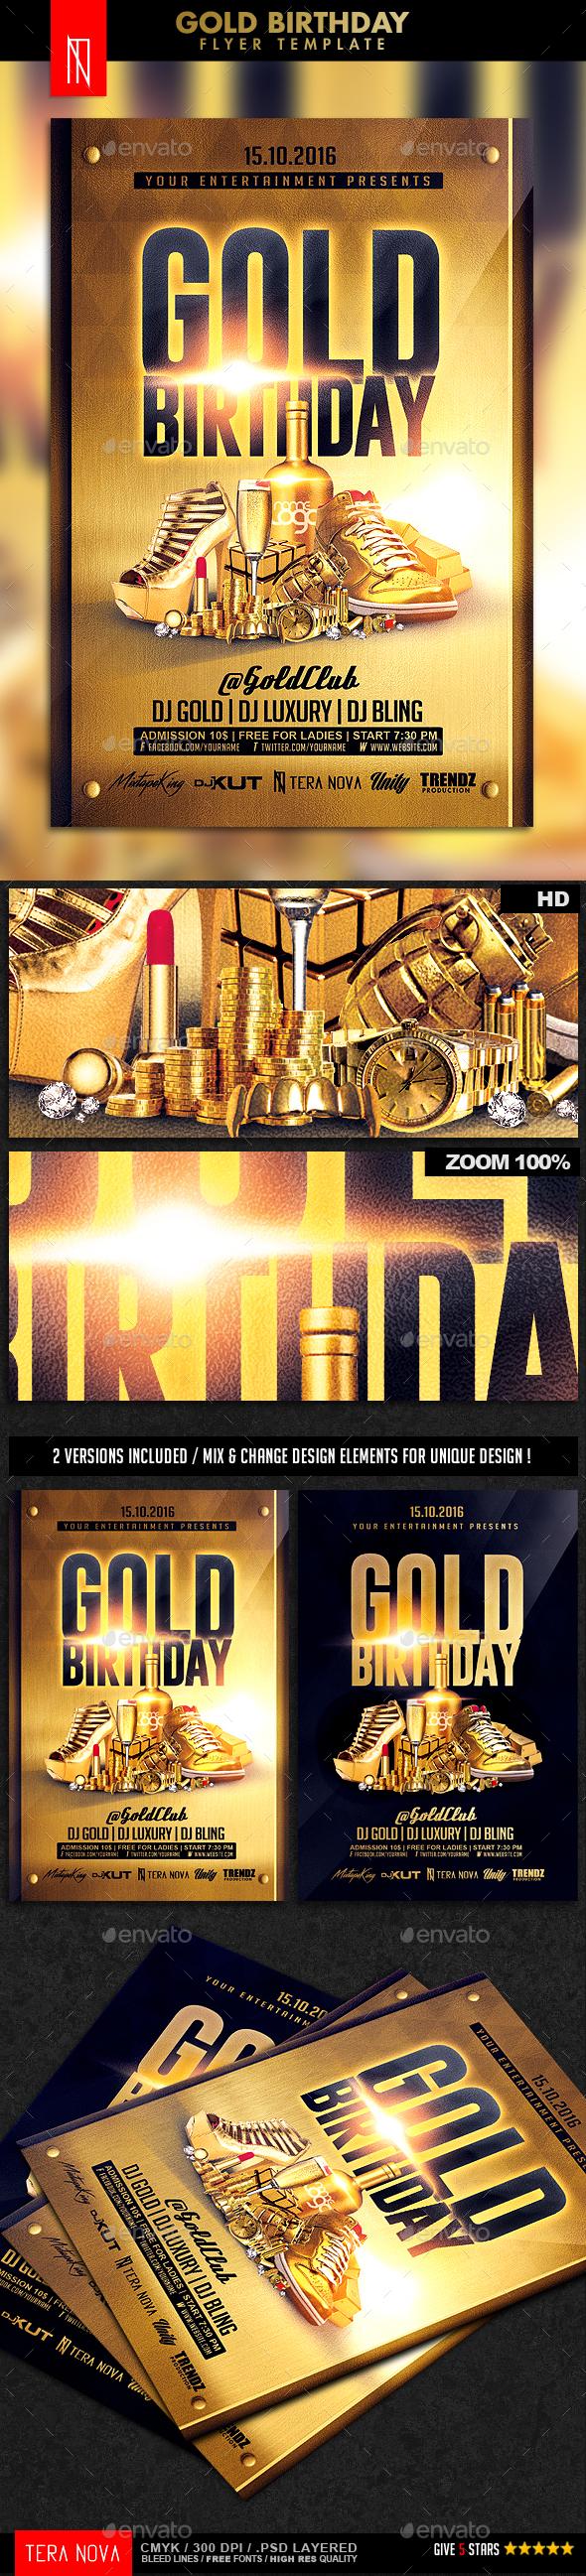 Graphicriver - Gold Birthday Bling Bling Flyer Template 14551136